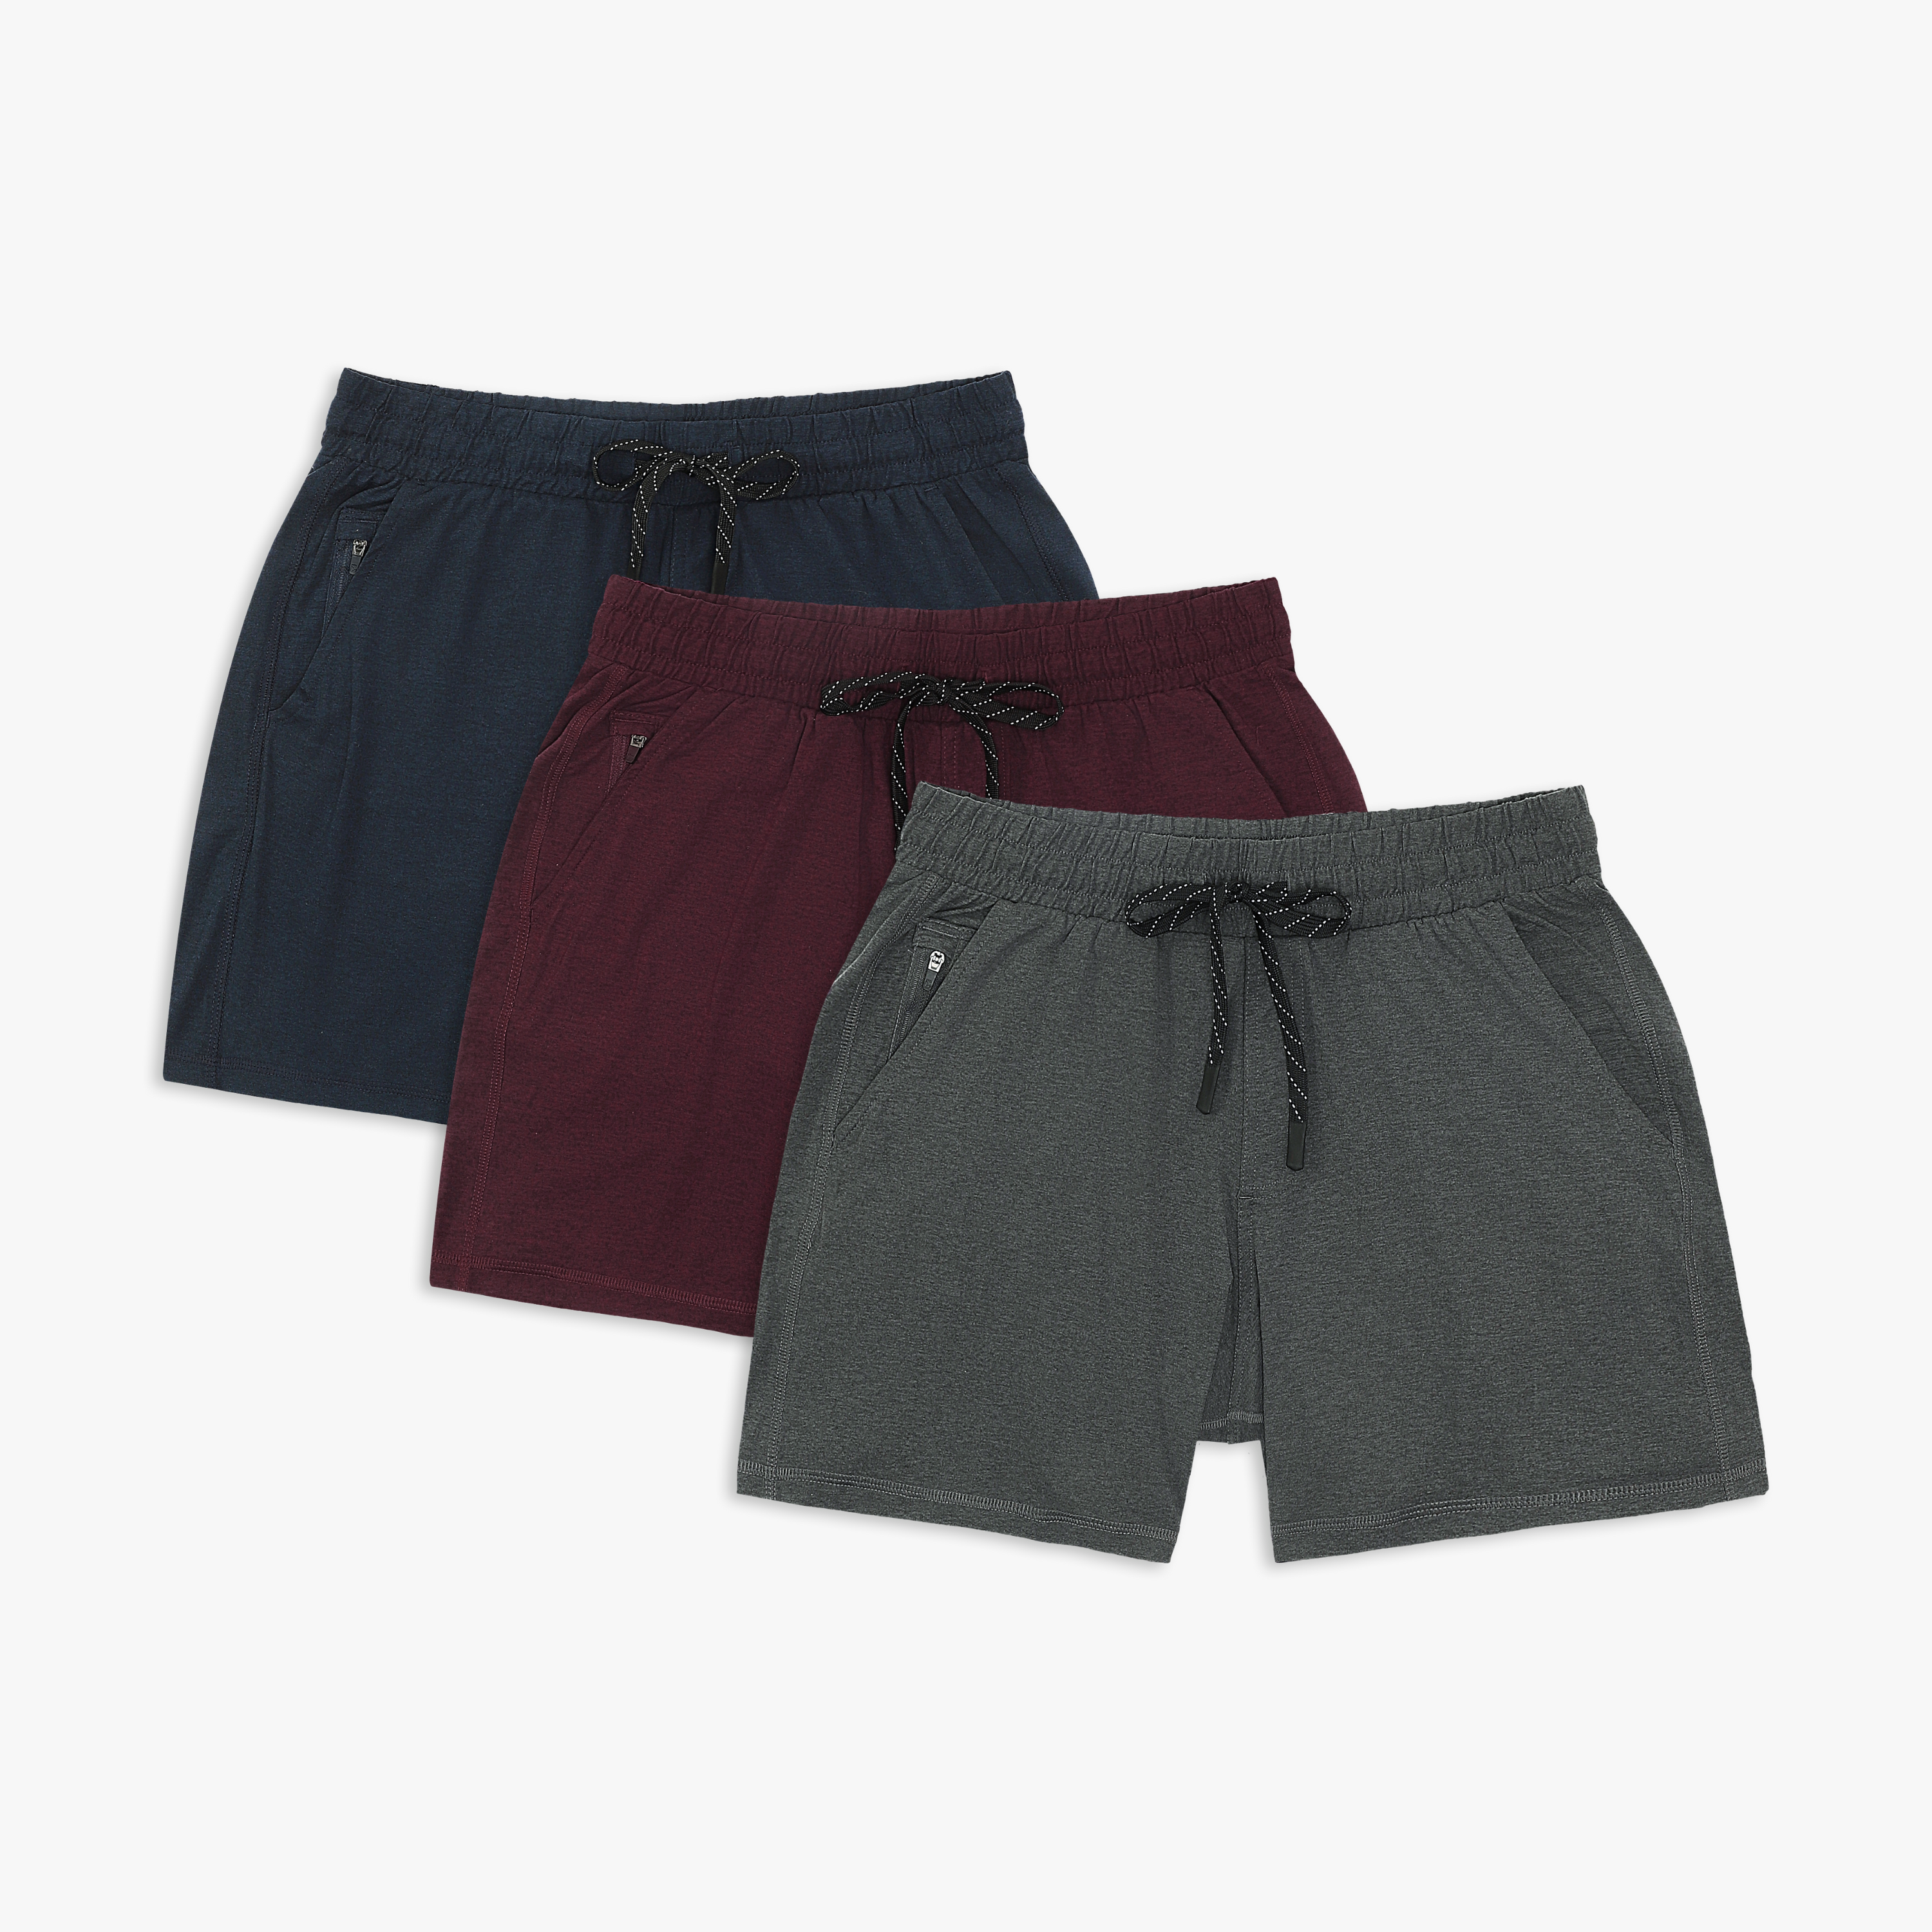 Tech Short 7" Charcoal, Maroon, and Navy